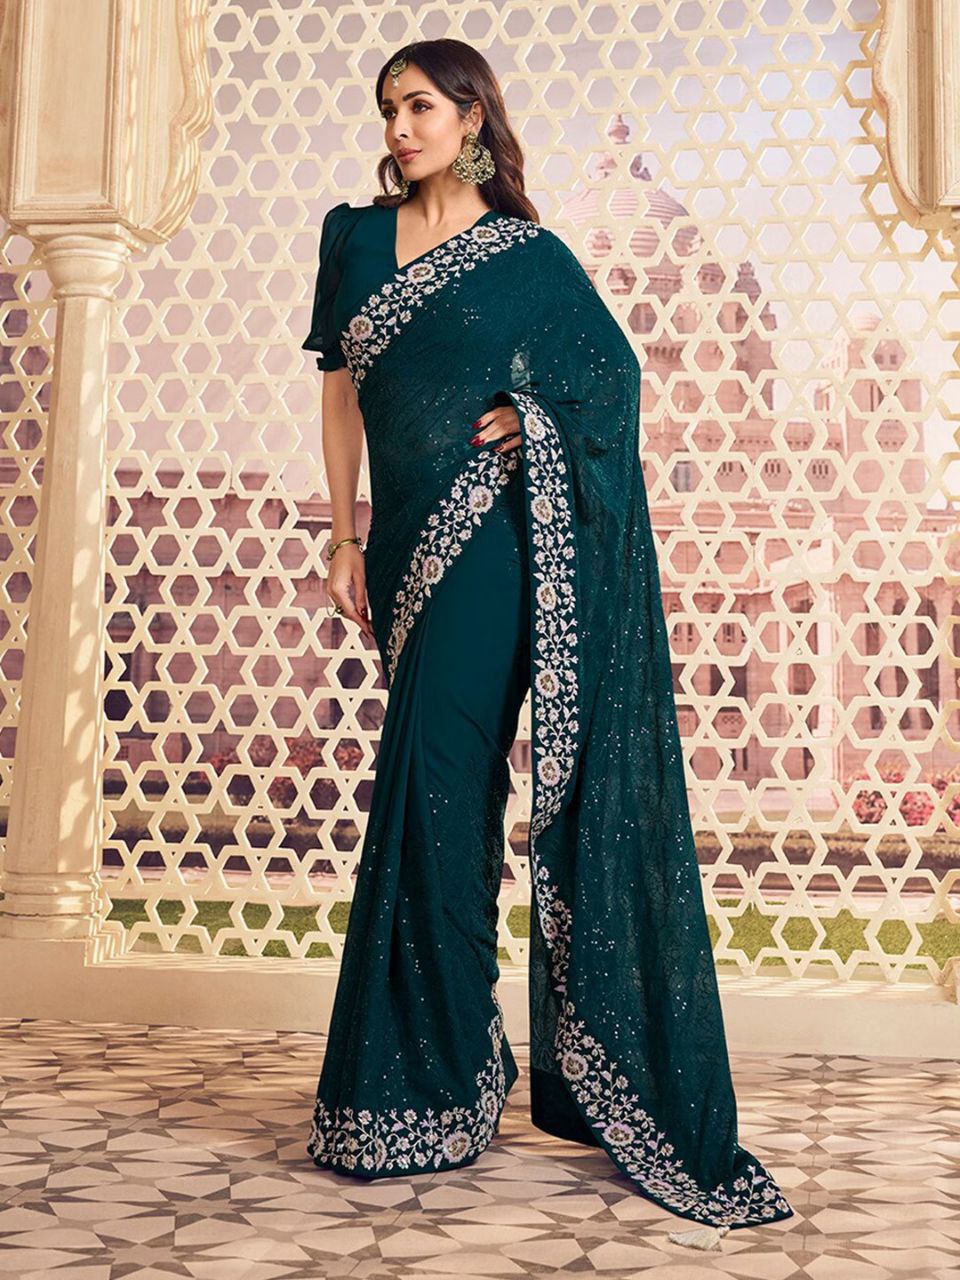 Bollywood Celebrity-Inspired Bottle Green Saree